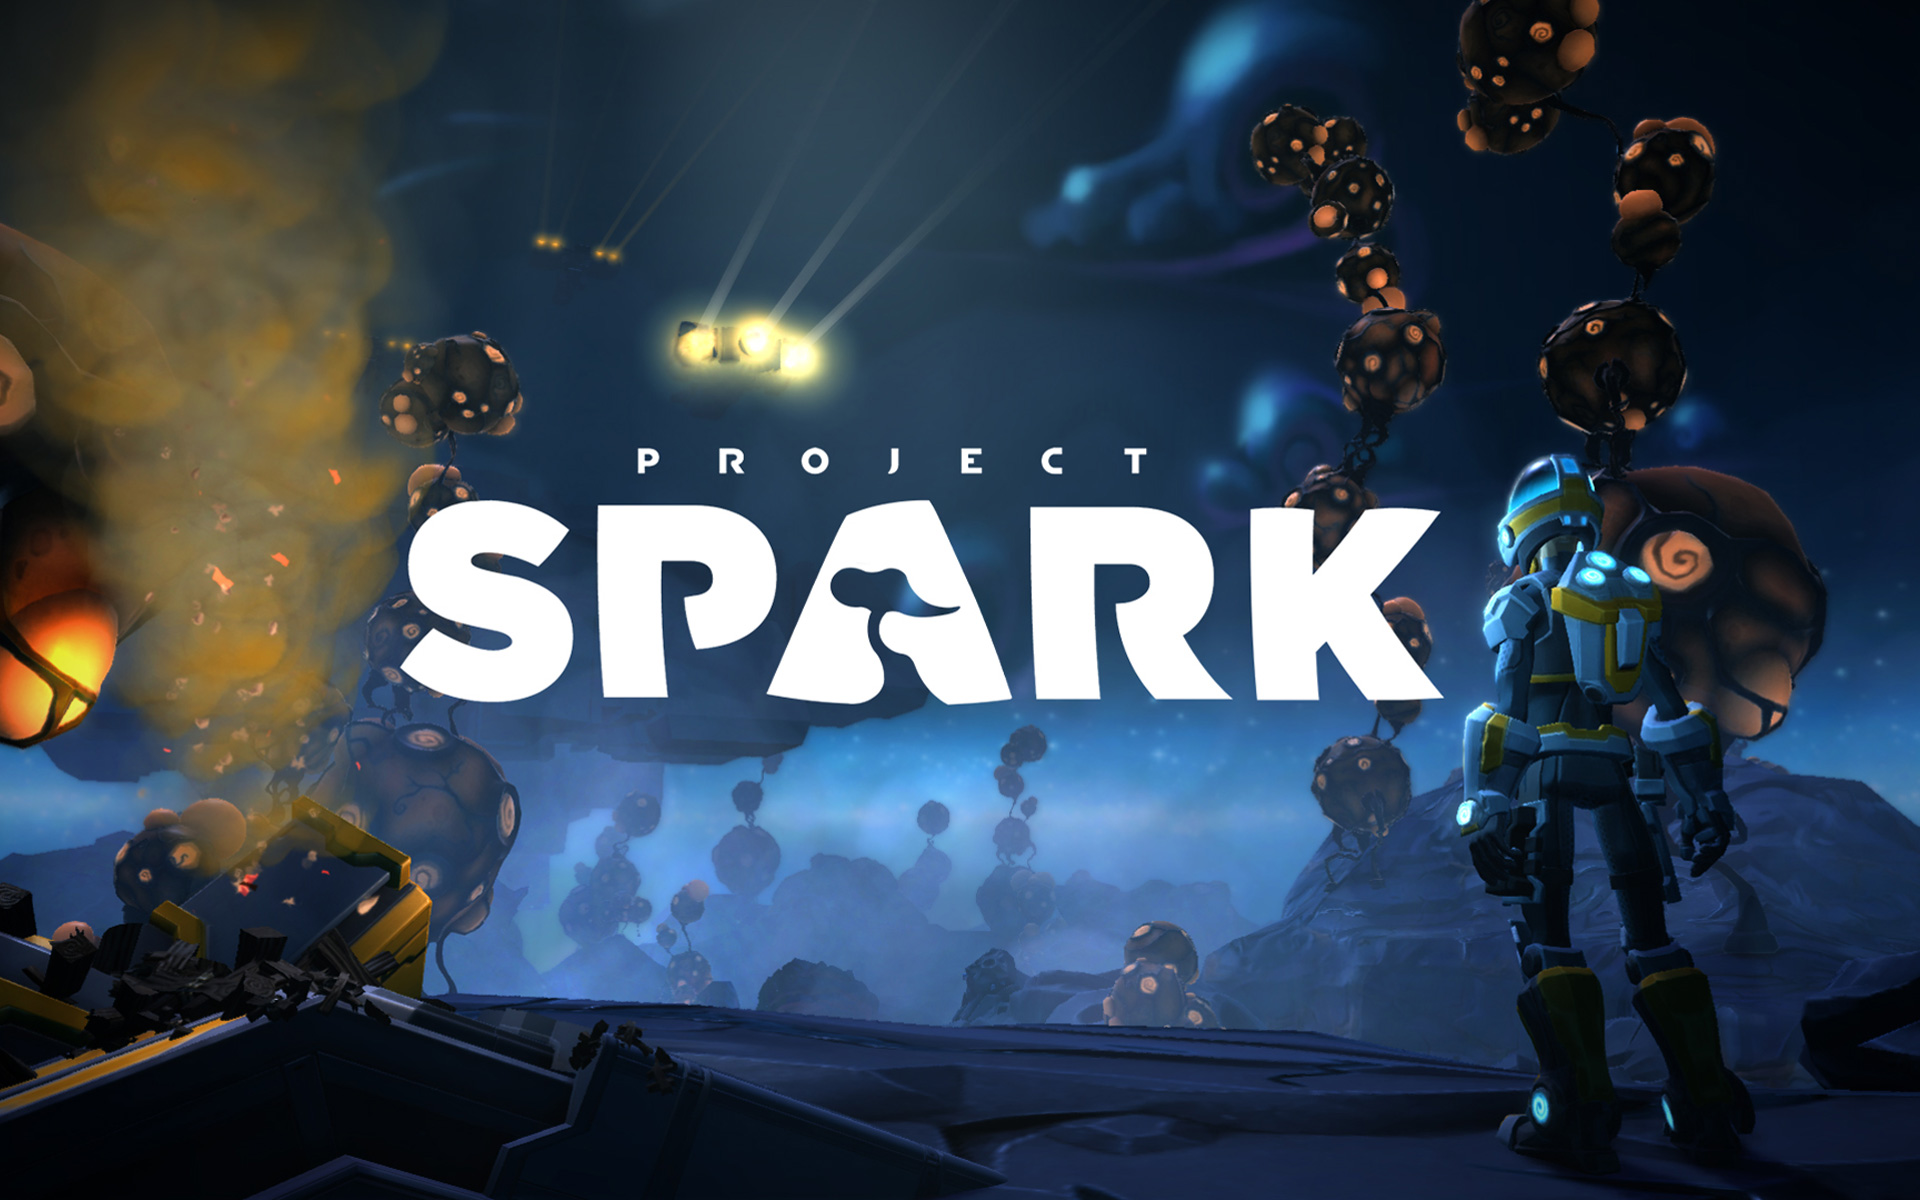 Project Spark Wallpaper in 1920x1200